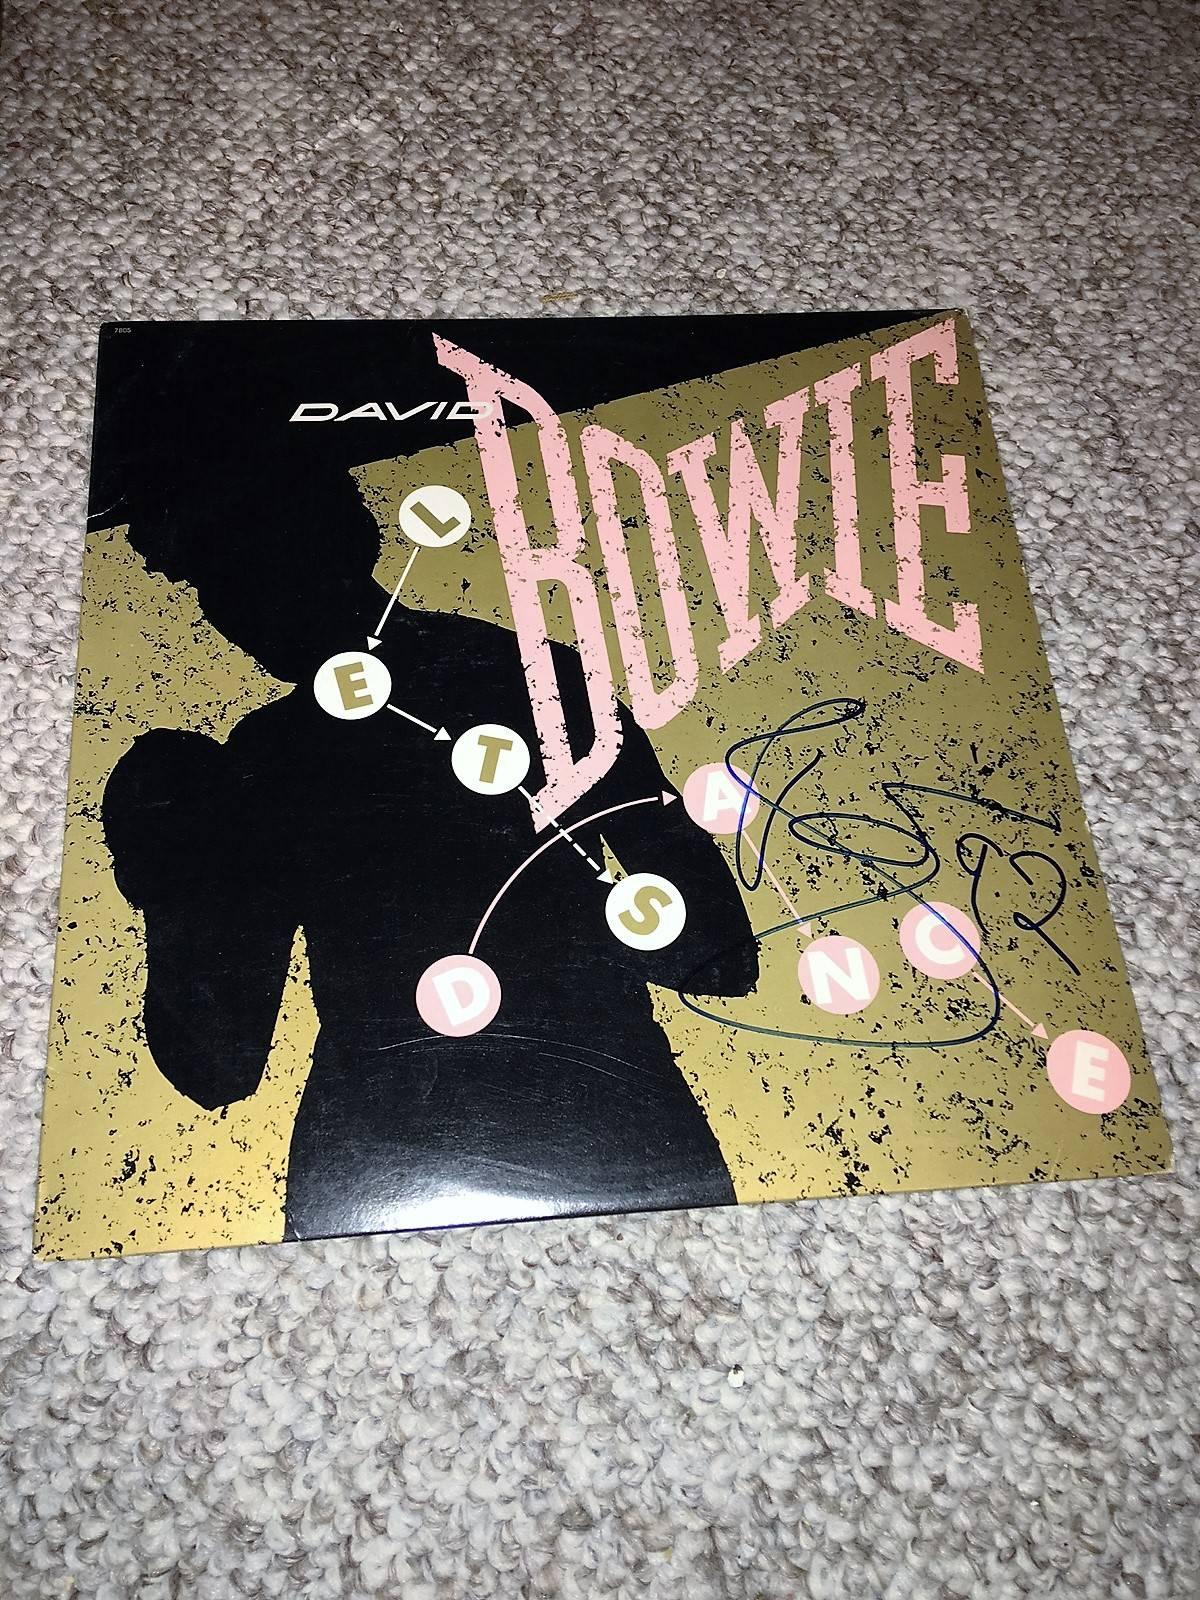 Modern David Bowie Autographed 'Let's Dance' Single Record Cover For Sale